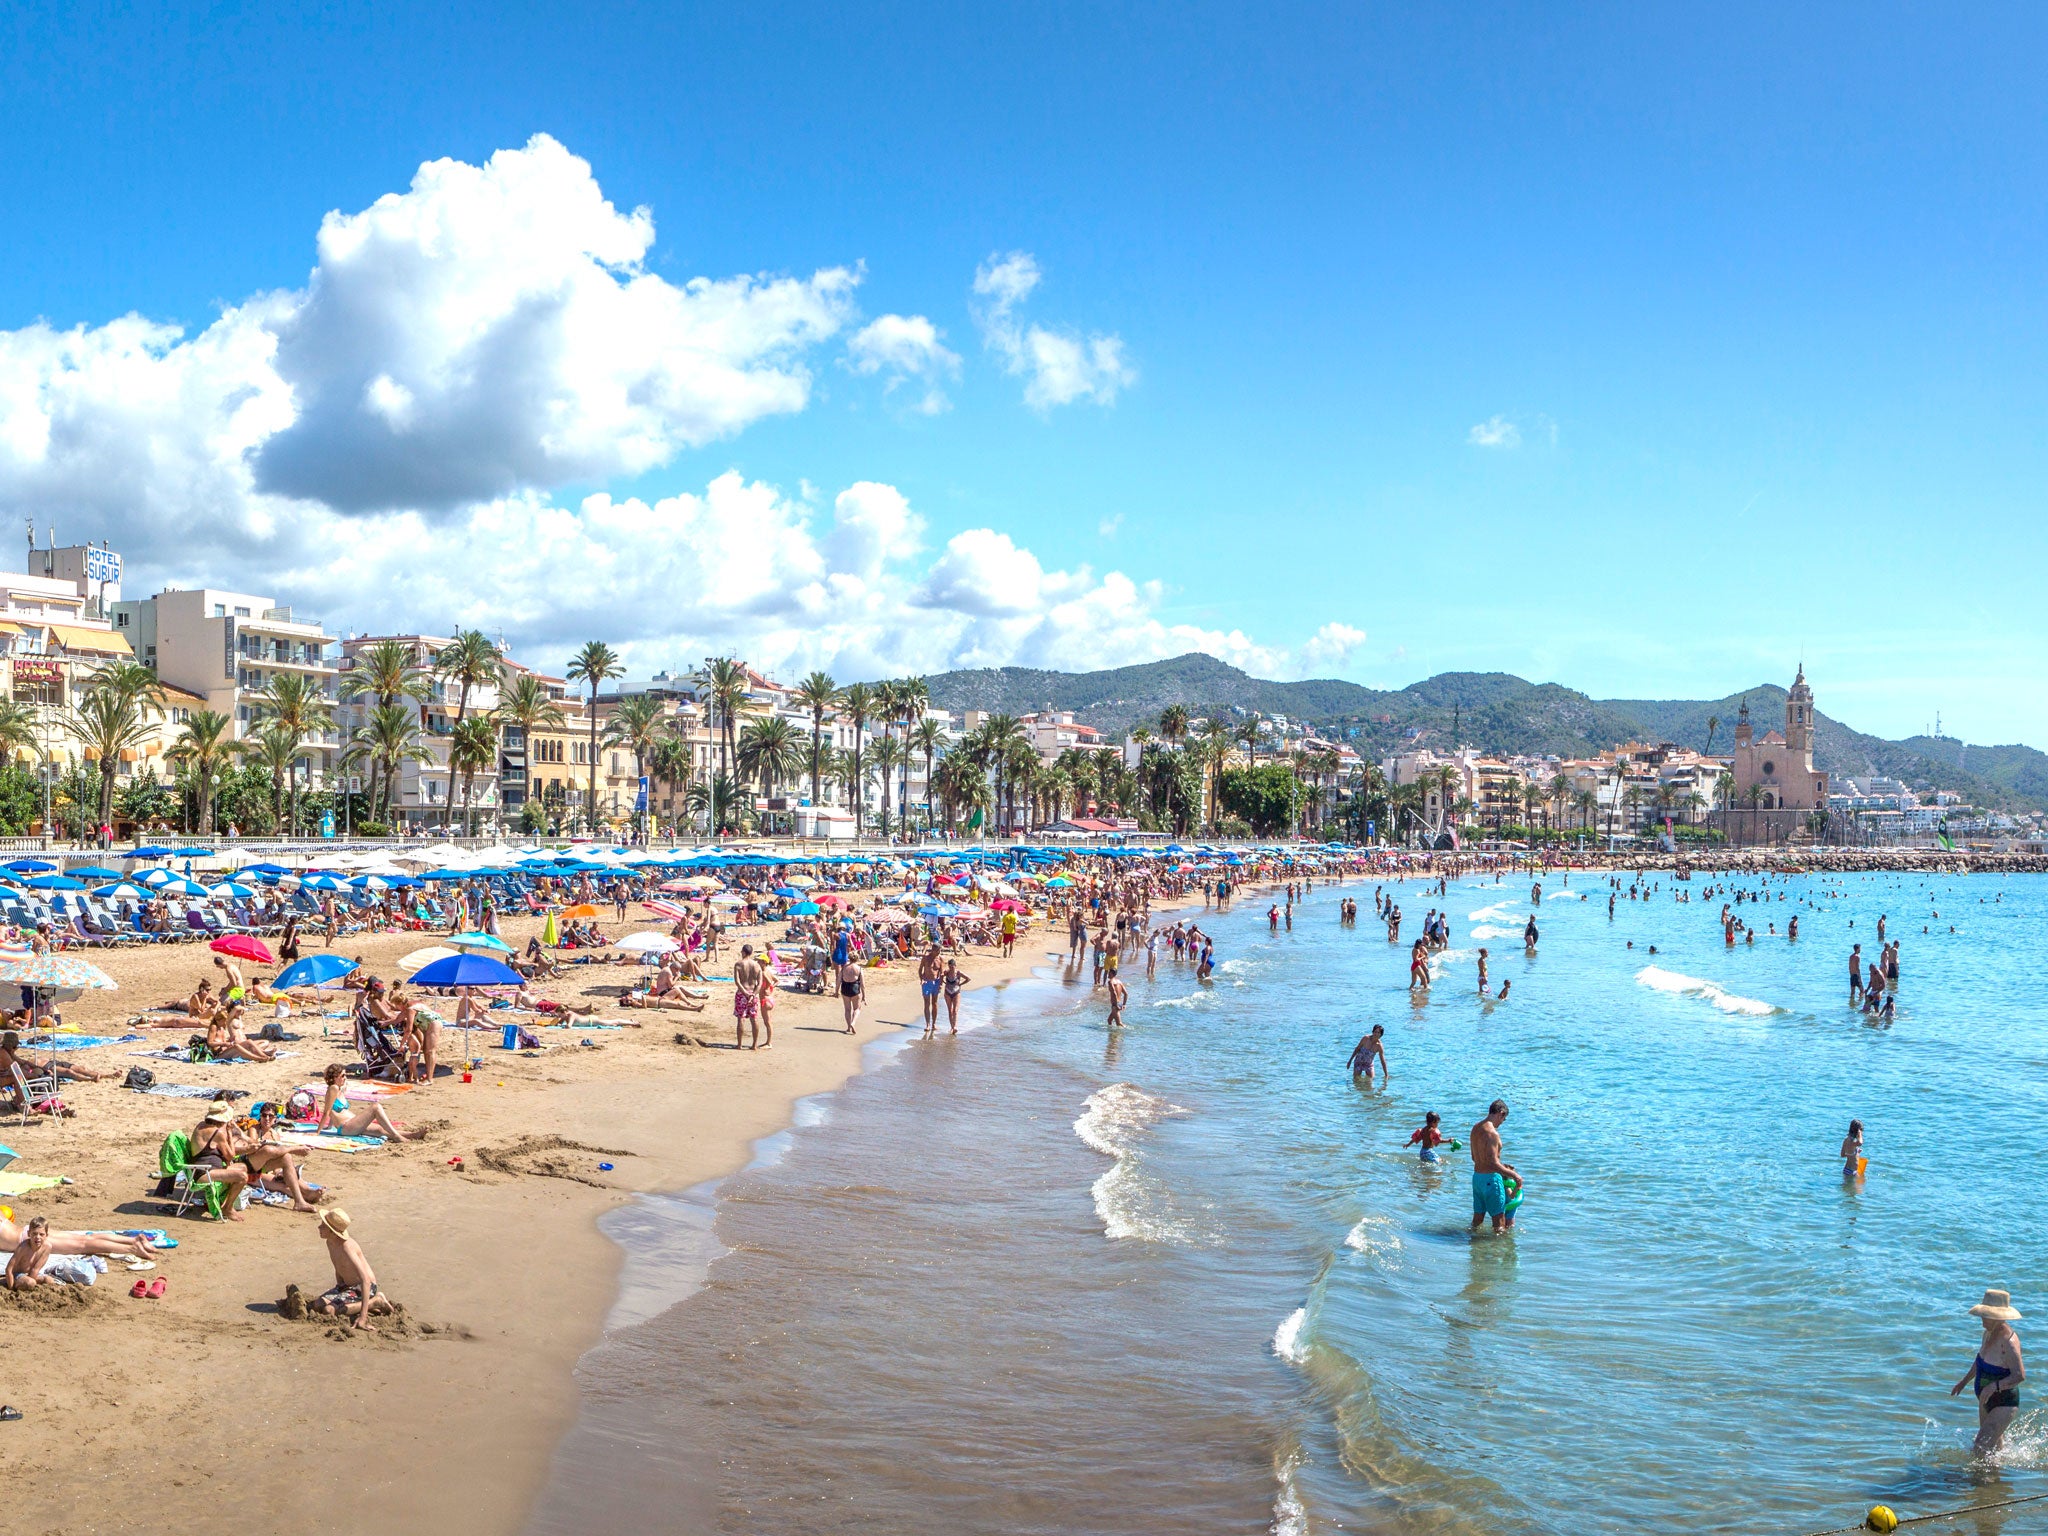 British tourists are returning to old favourites in Spain this summer